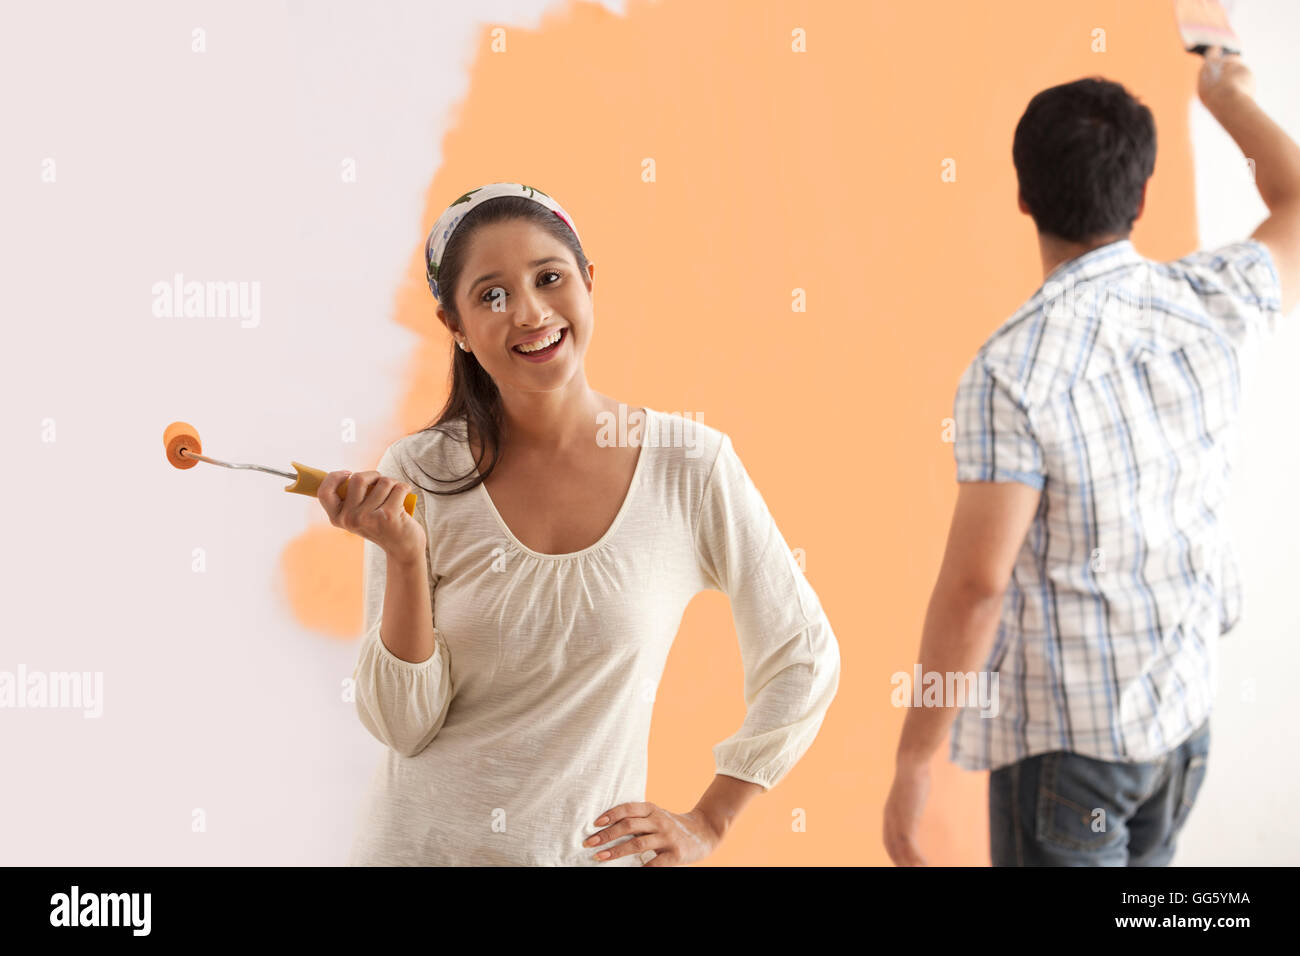 Portrait of smiling young woman with man painting wall en arrière-plan Banque D'Images